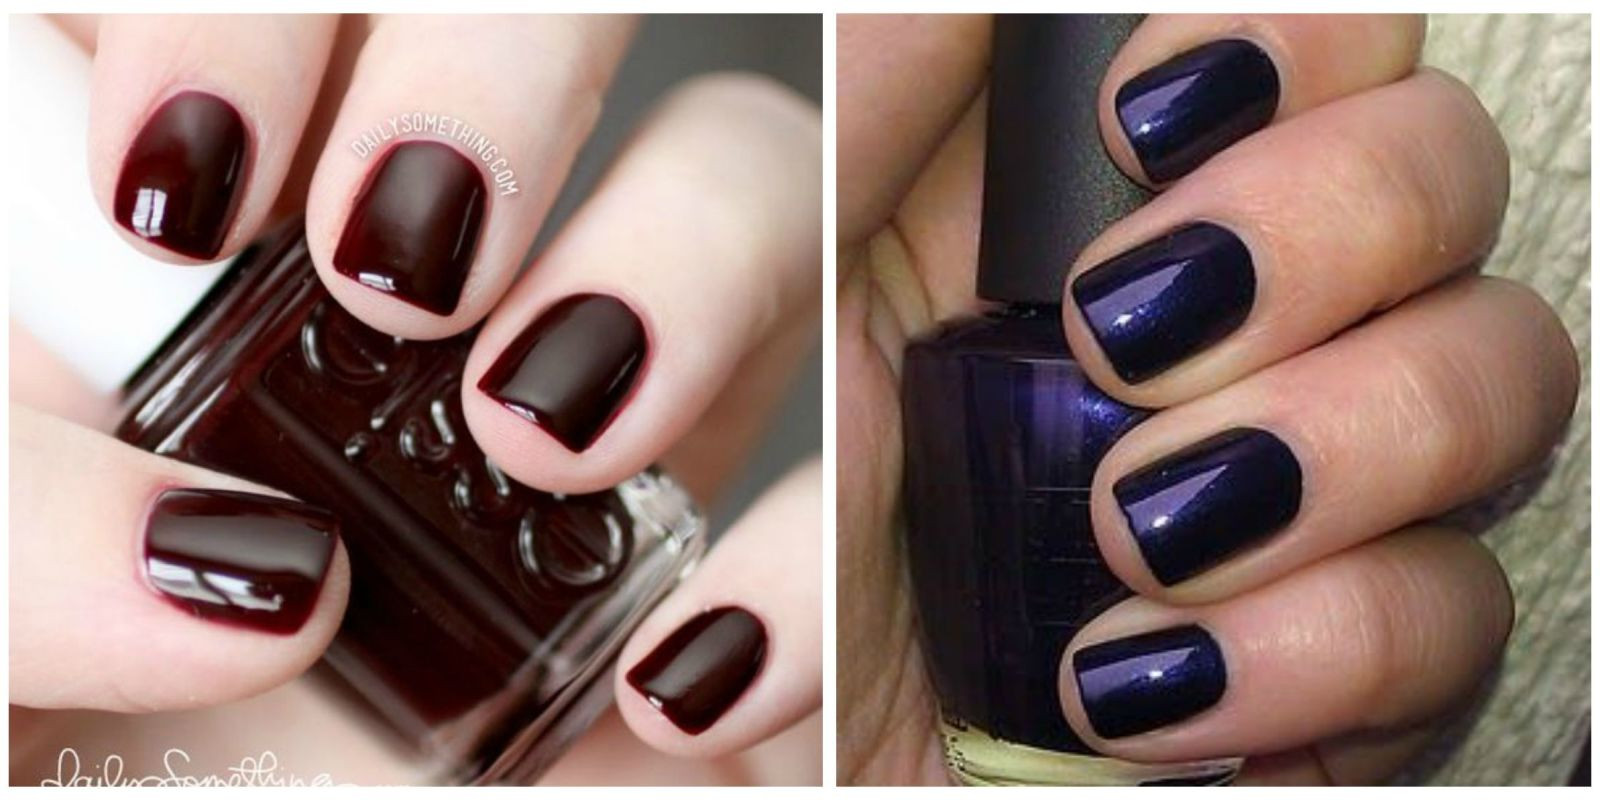 Best Nail Colors For Fall
 Best Dark Nail Polish Colors Nail Polish for Fall and